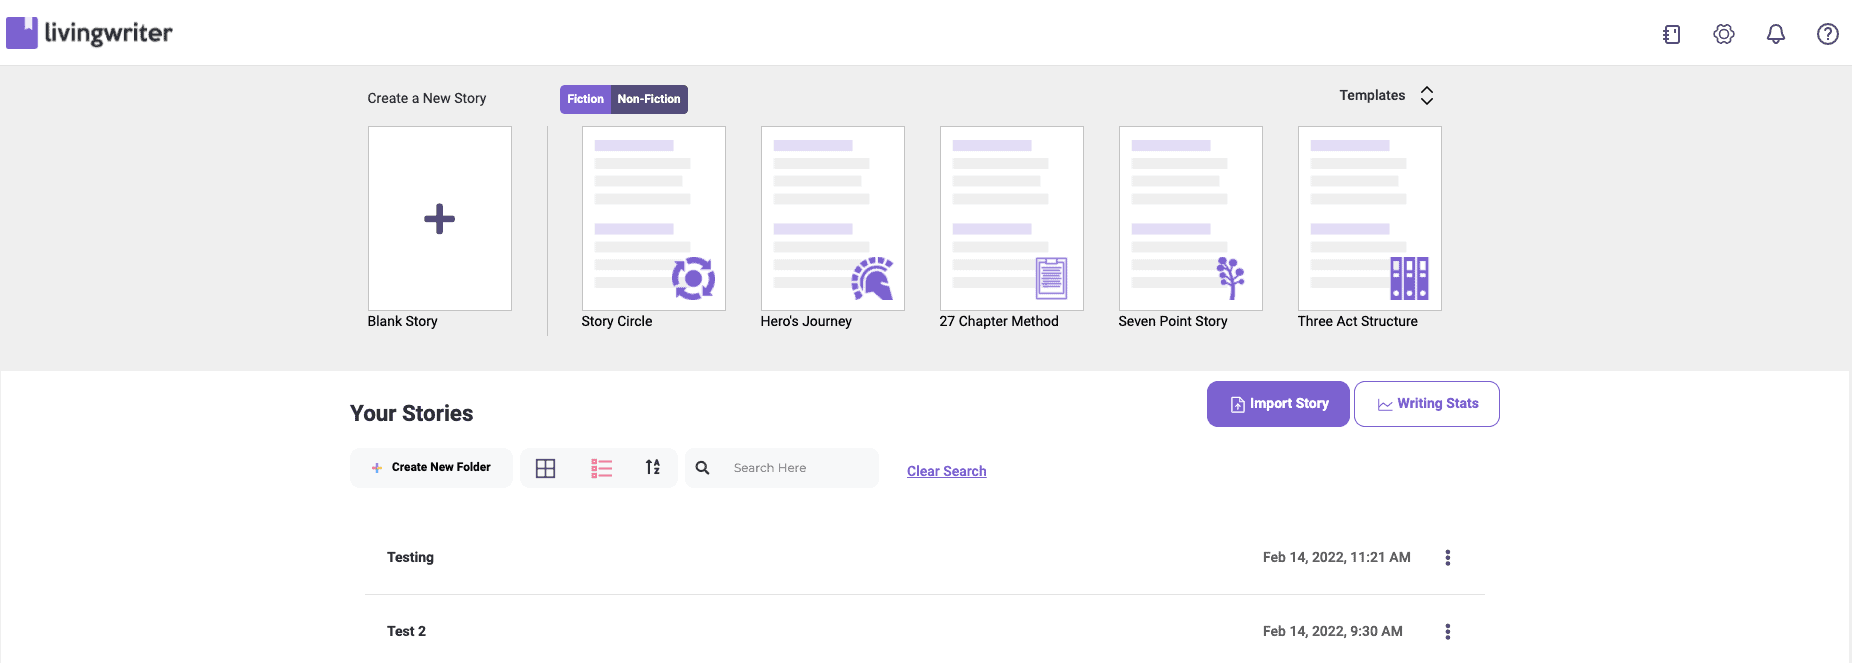 Living Writer's dashboard features a variety of template options.